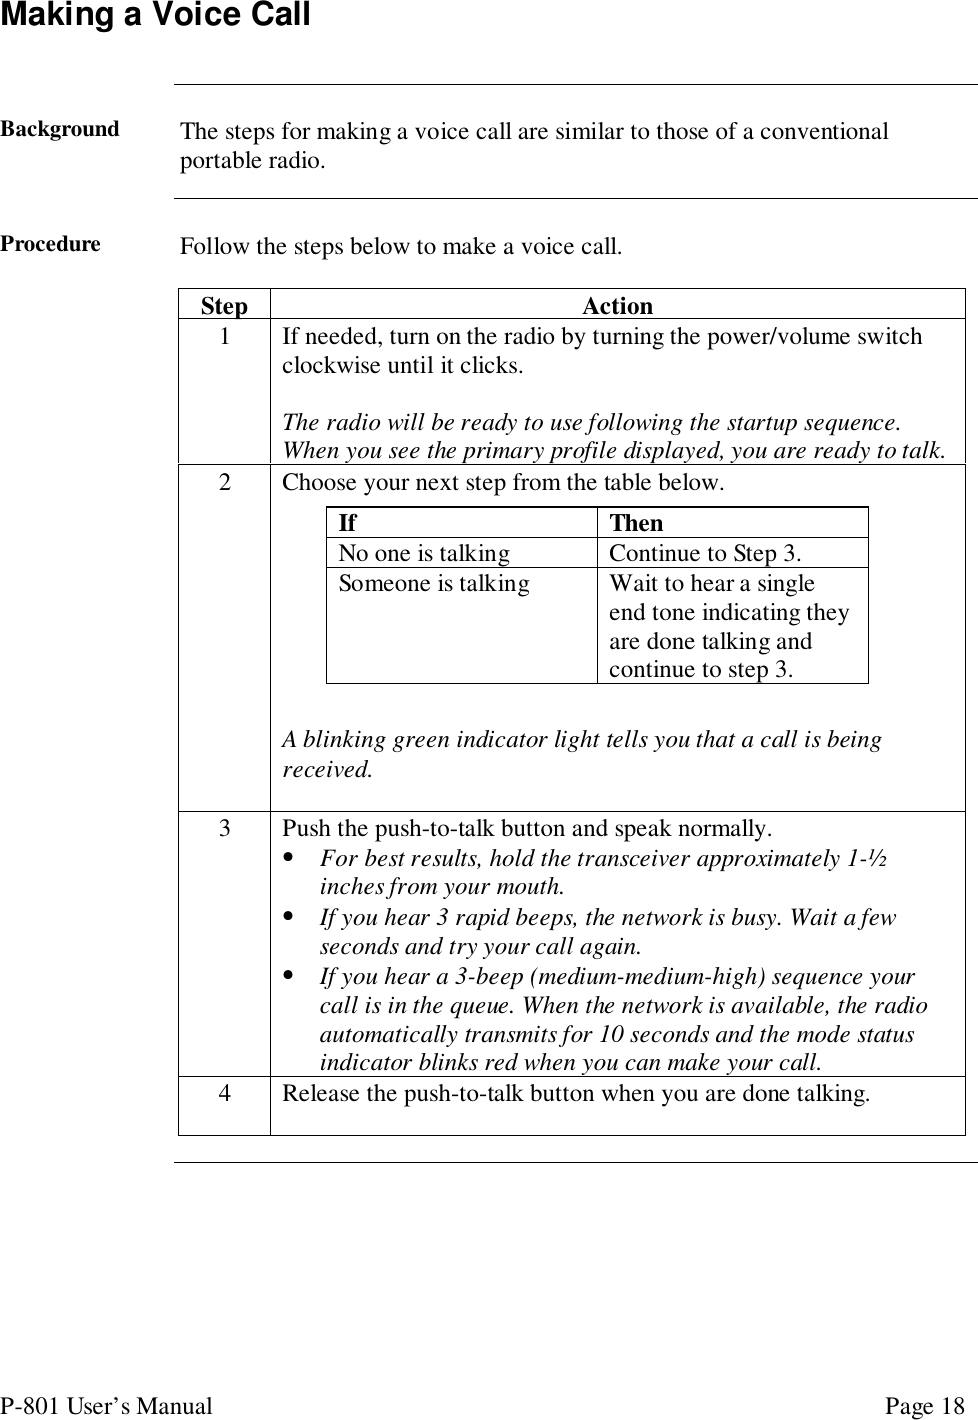 P-801 User’s Manual Page 18Making a Voice CallBackground The steps for making a voice call are similar to those of a conventionalportable radio.Procedure Follow the steps below to make a voice call.Step Action1 If needed, turn on the radio by turning the power/volume switchclockwise until it clicks.The radio will be ready to use following the startup sequence.When you see the primary profile displayed, you are ready to talk.2 Choose your next step from the table below.A blinking green indicator light tells you that a call is beingreceived.3 Push the push-to-talk button and speak normally.• For best results, hold the transceiver approximately 1-½inches from your mouth.• If you hear 3 rapid beeps, the network is busy. Wait a fewseconds and try your call again.• If you hear a 3-beep (medium-medium-high) sequence yourcall is in the queue. When the network is available, the radioautomatically transmits for 10 seconds and the mode statusindicator blinks red when you can make your call.4 Release the push-to-talk button when you are done talking.If ThenNo one is talking Continue to Step 3.Someone is talking Wait to hear a singleend tone indicating theyare done talking andcontinue to step 3.